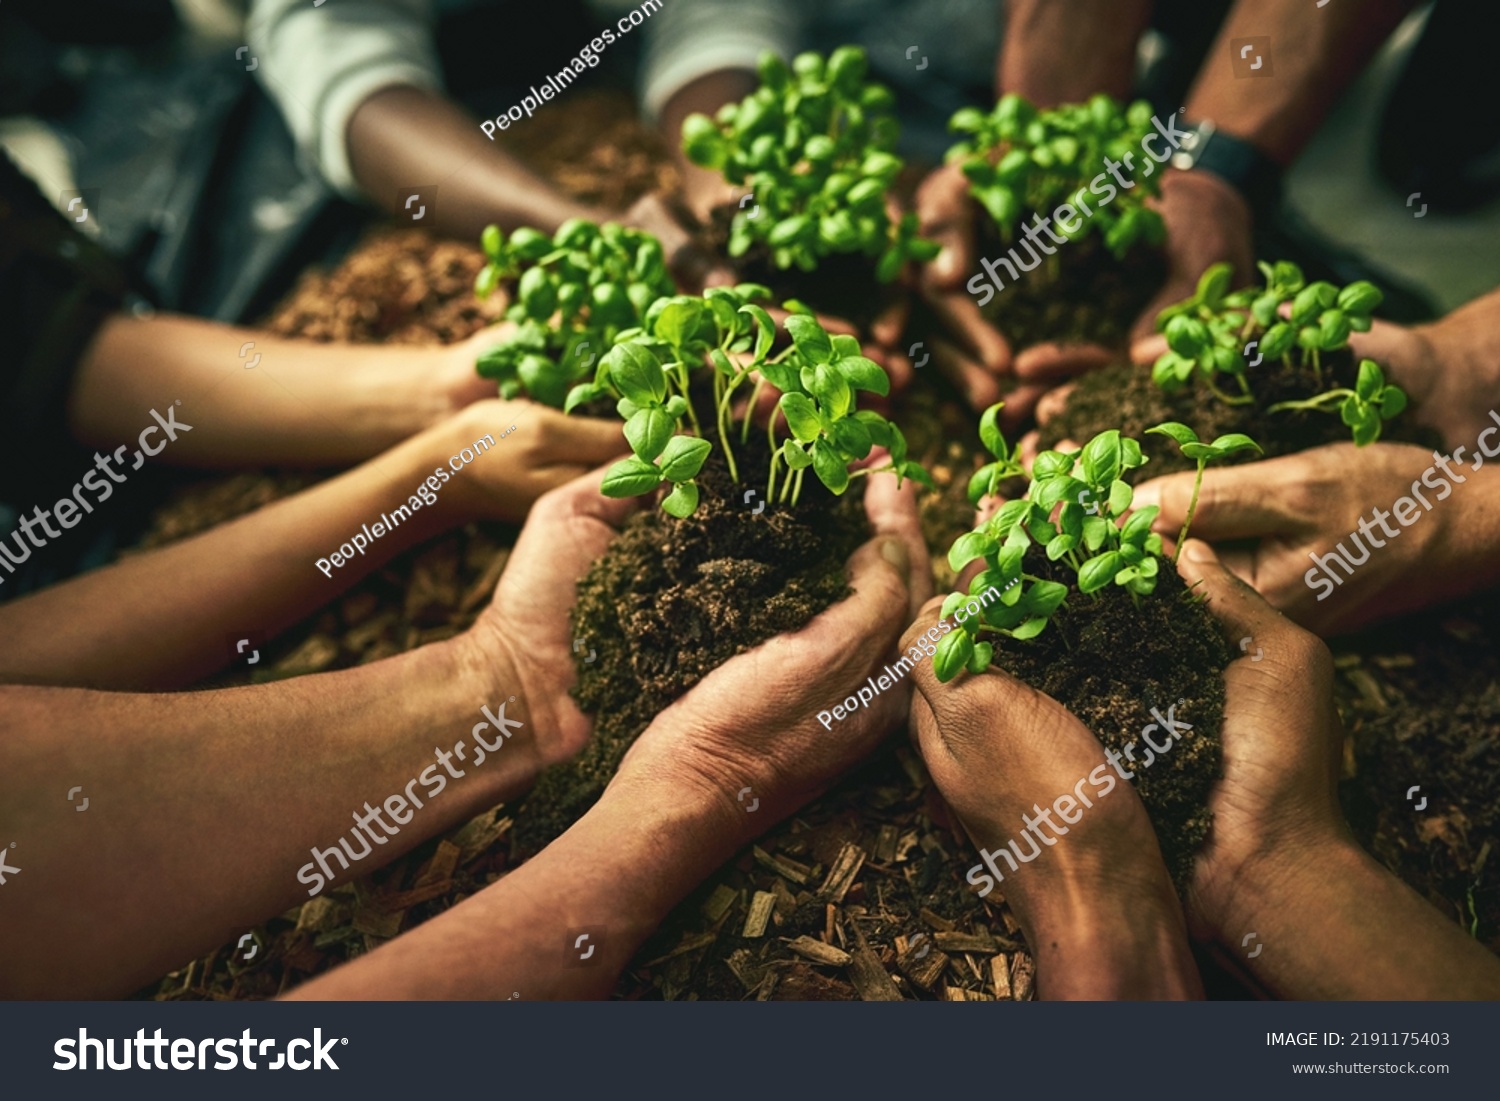 A diverse group of sustainable people holding plants in an eco friendly environment for nature conservation. Closeup of hands planting in fertile soil for sustainability and organic farming #2191175403